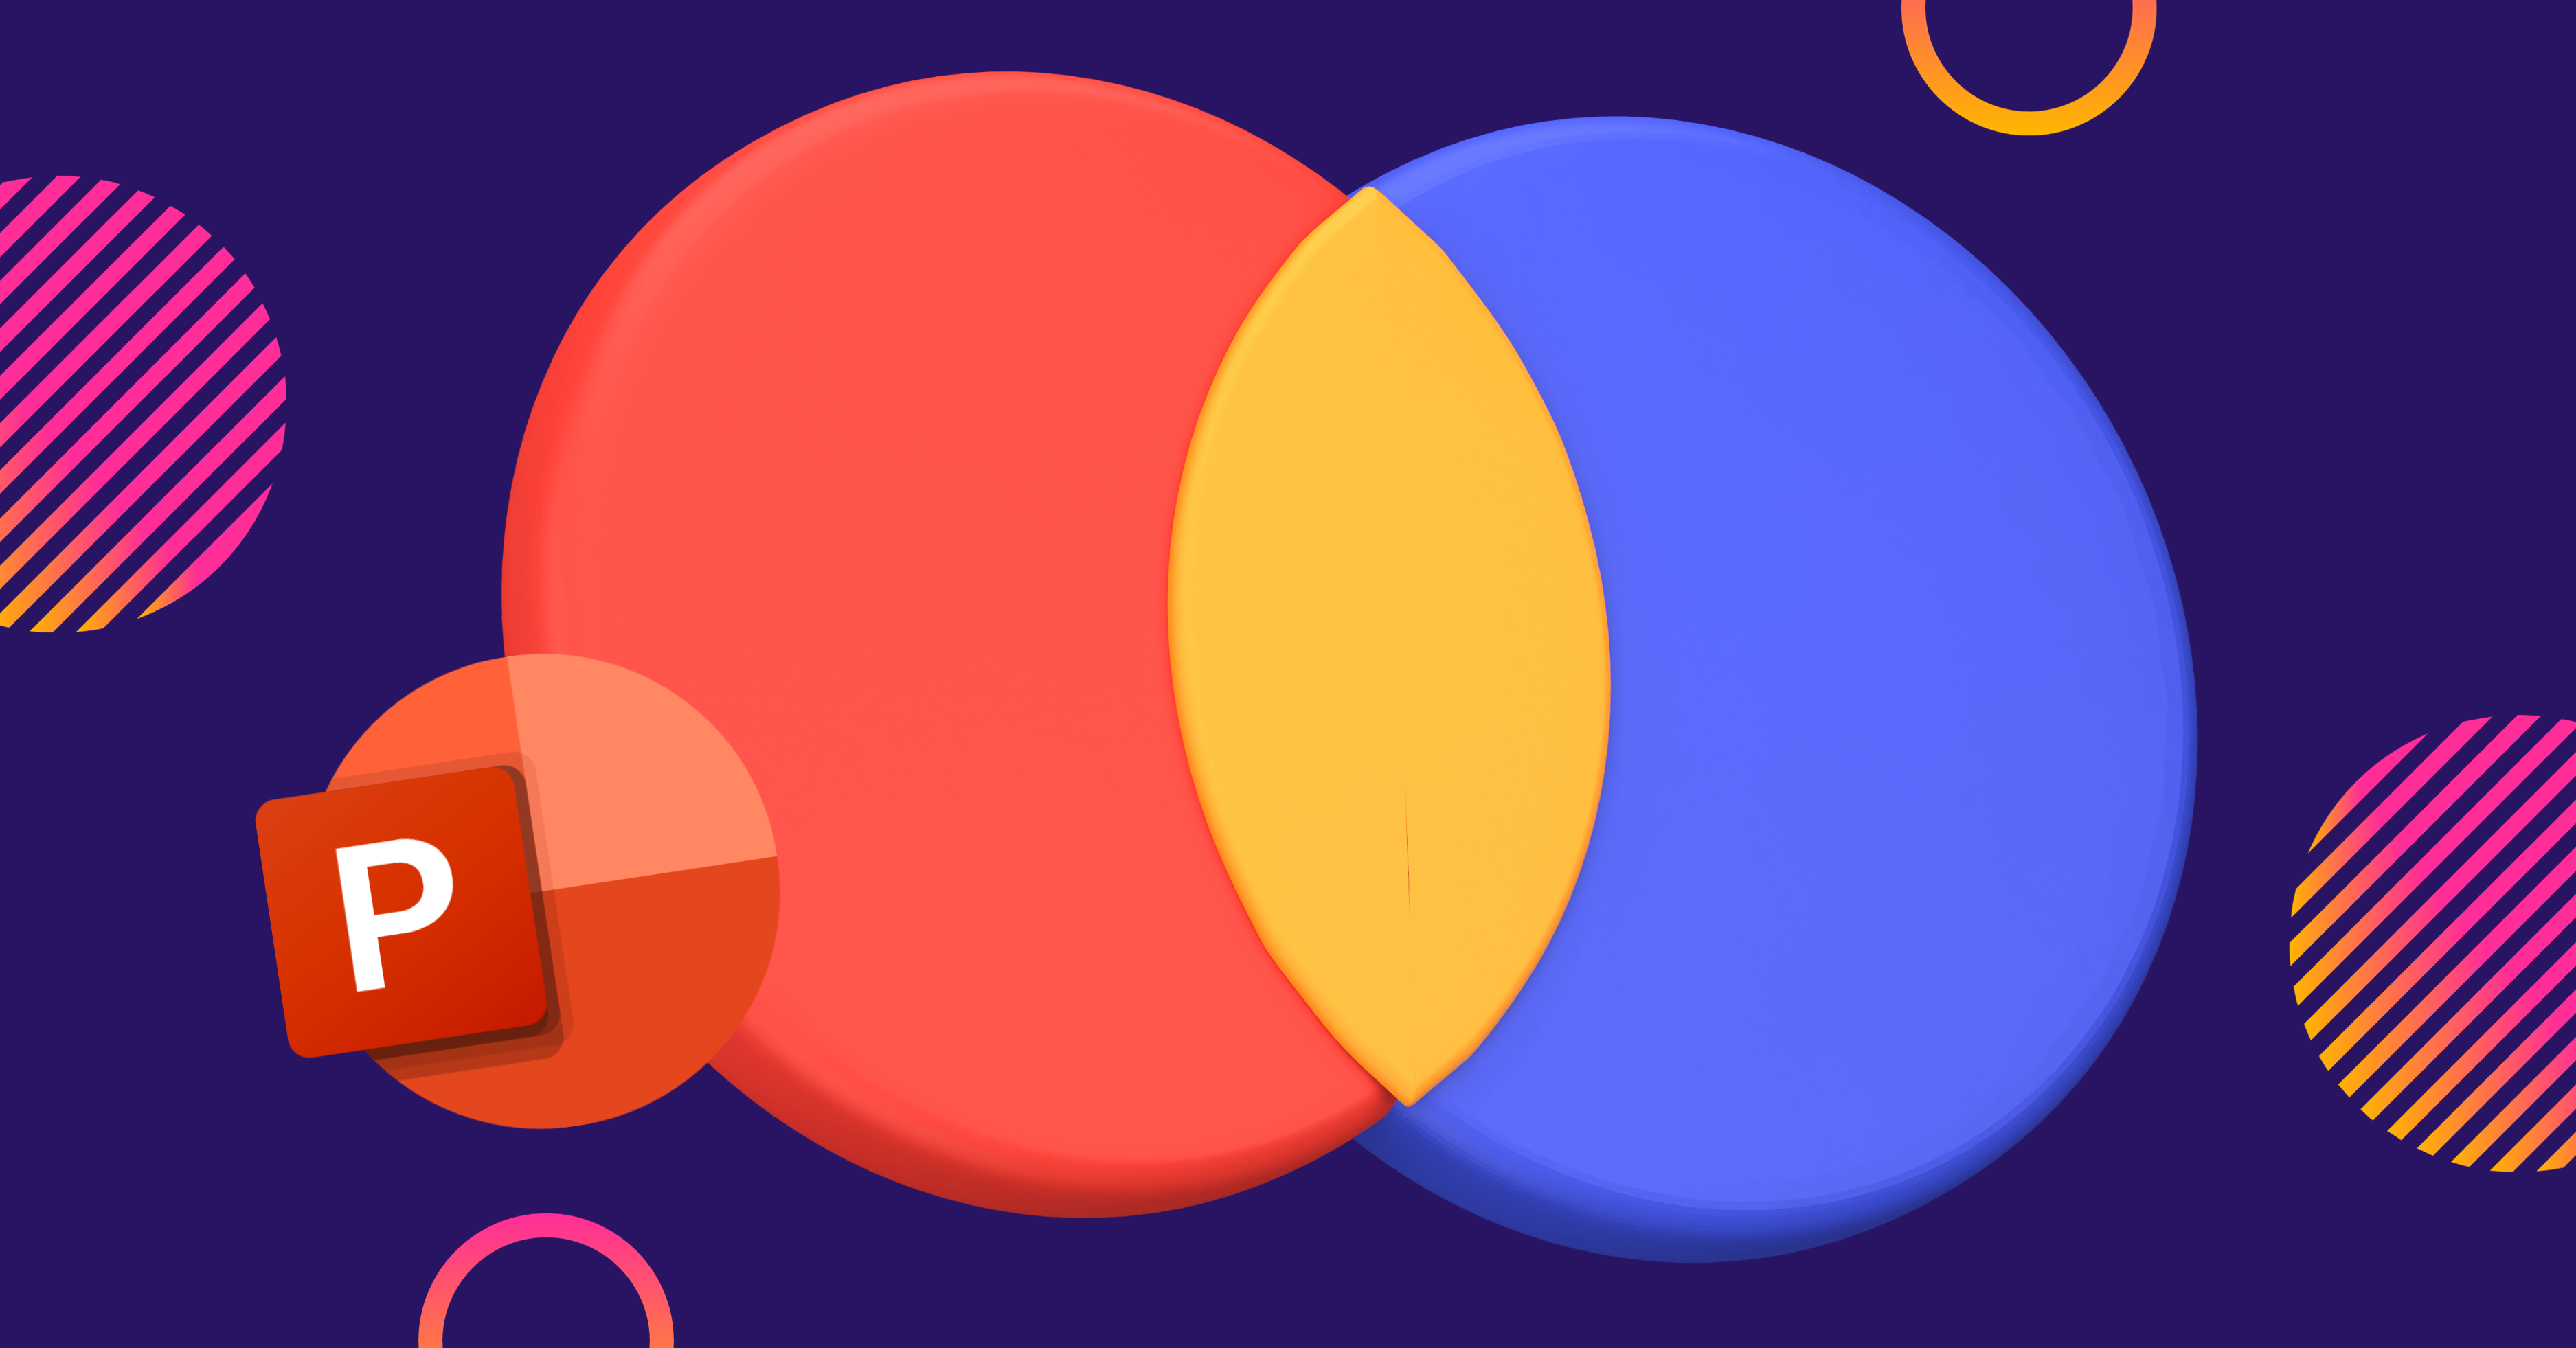 3 Insanely Simple Ways to Create a Venn Diagram in PowerPoint (+ A Bonus Interactive Hack!)